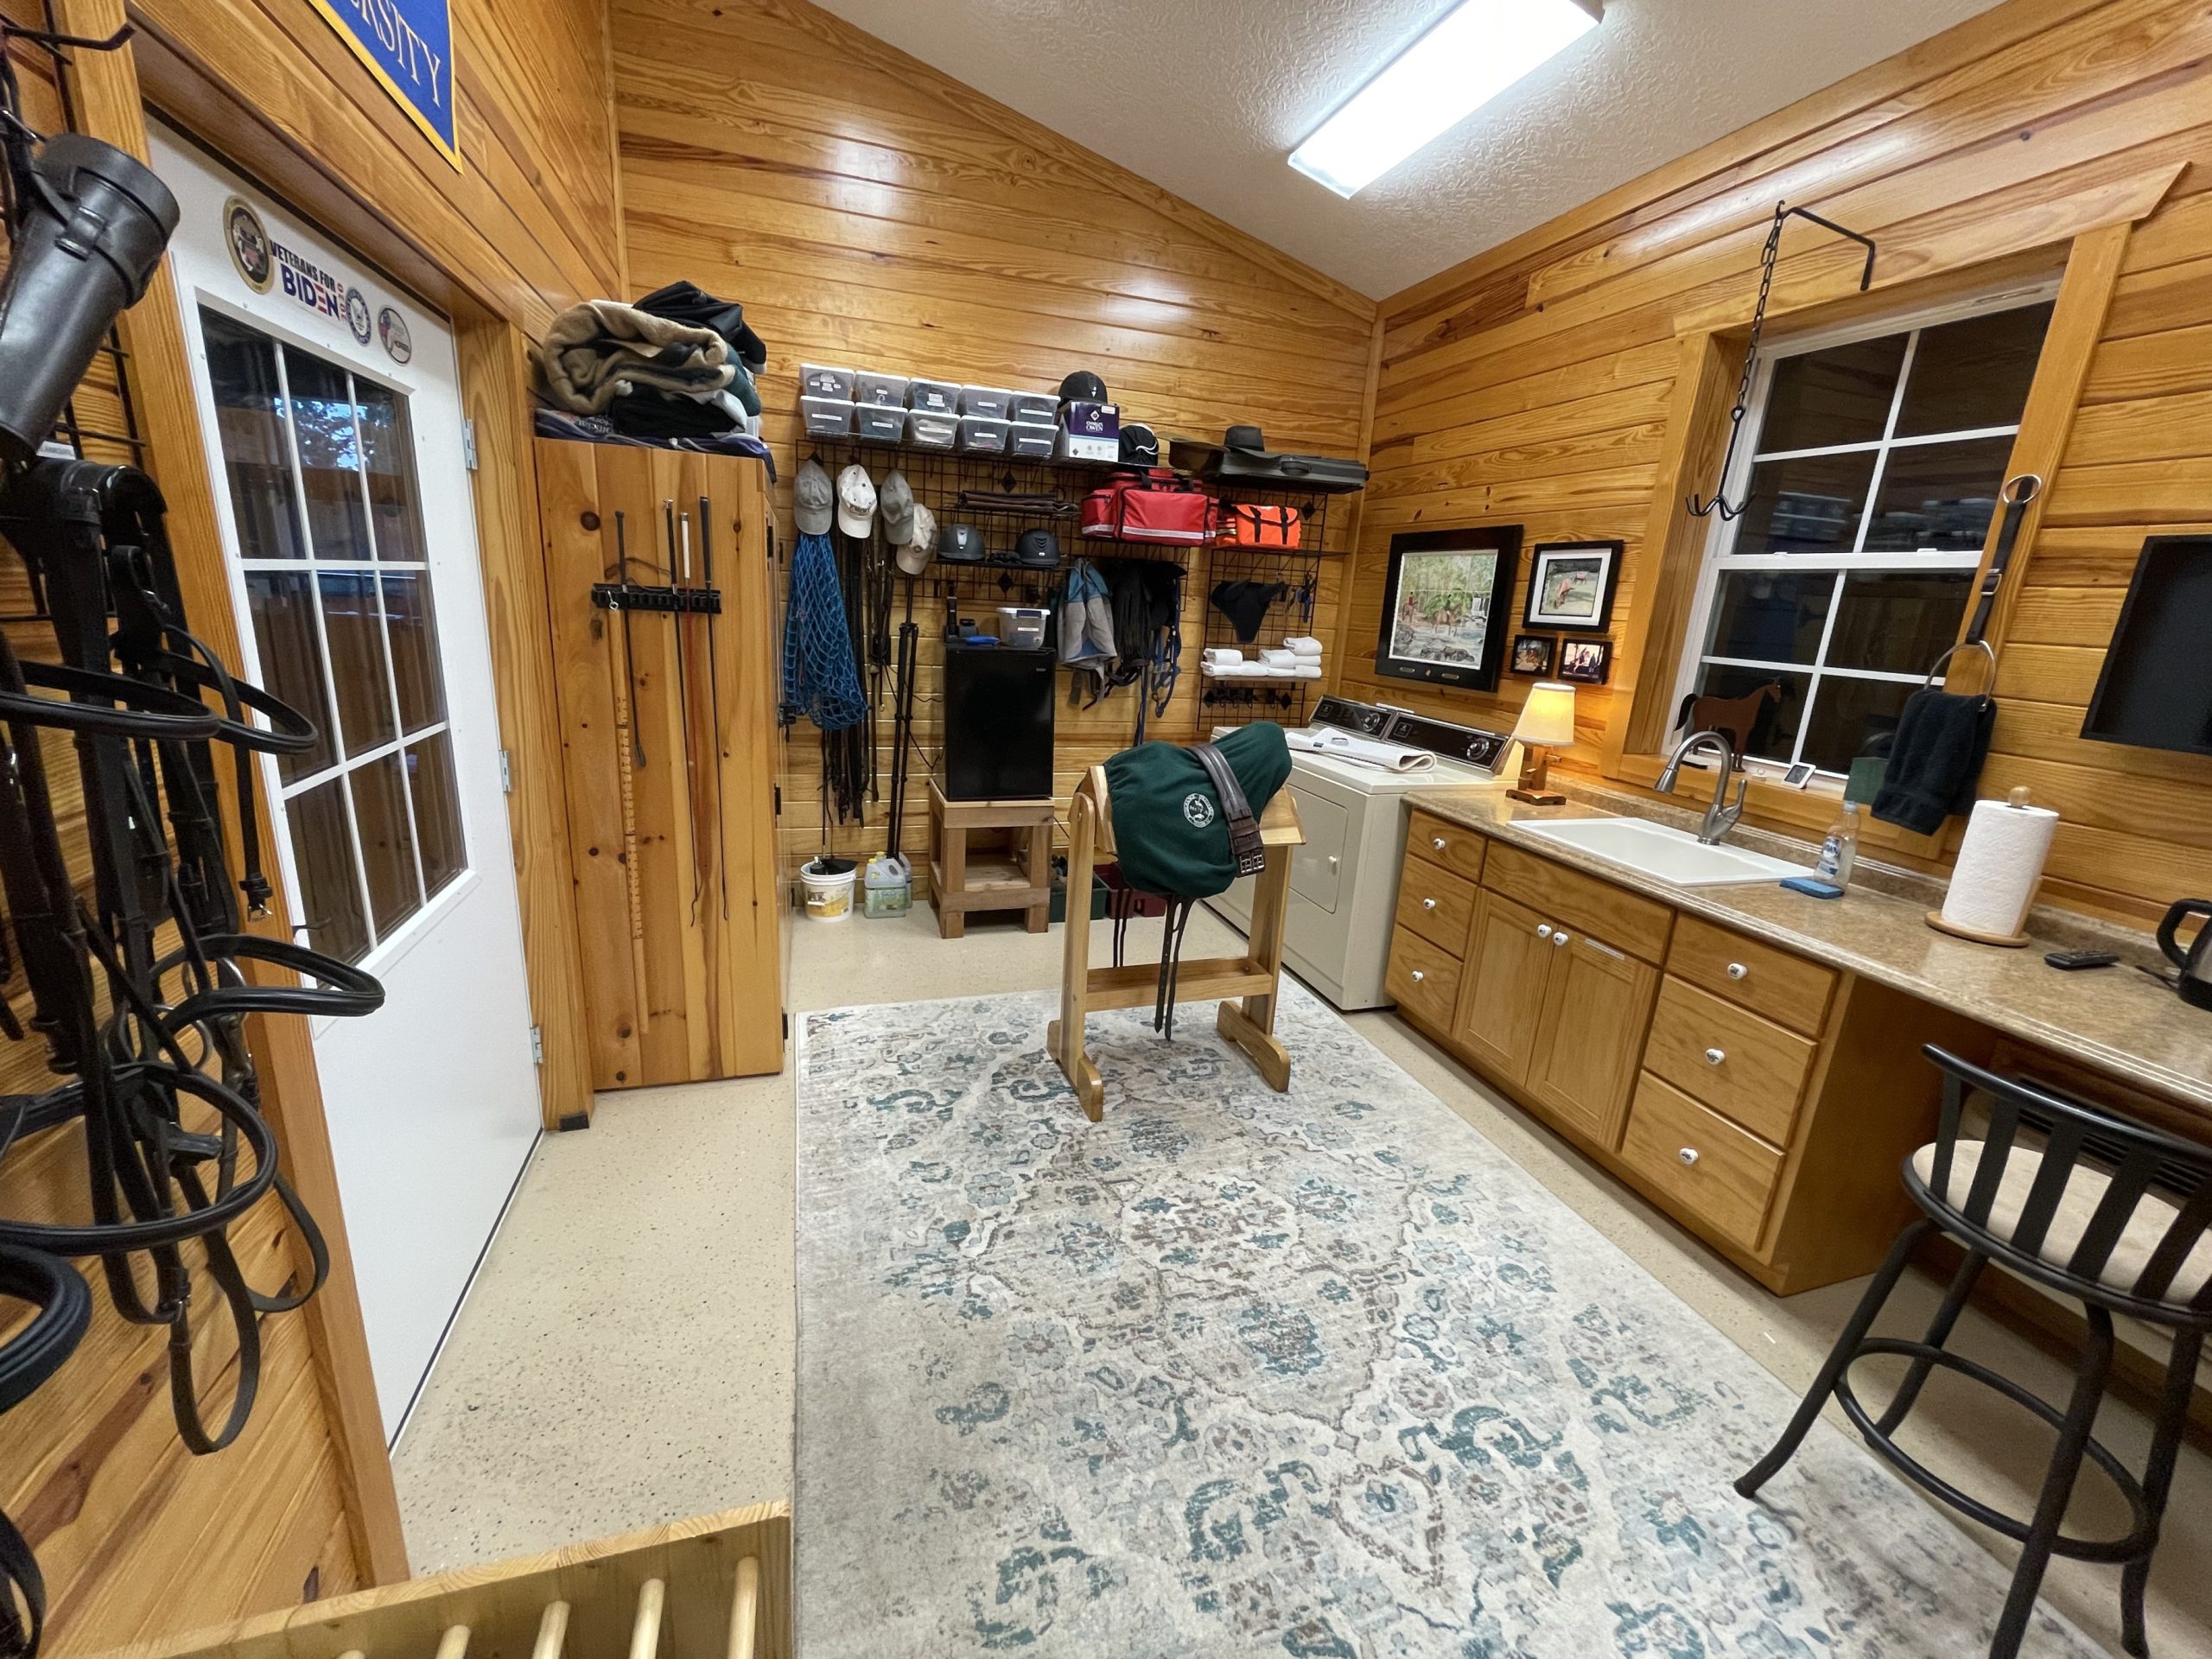 Tack room layout and organization - Hunter/Jumper - Chronicle Forums